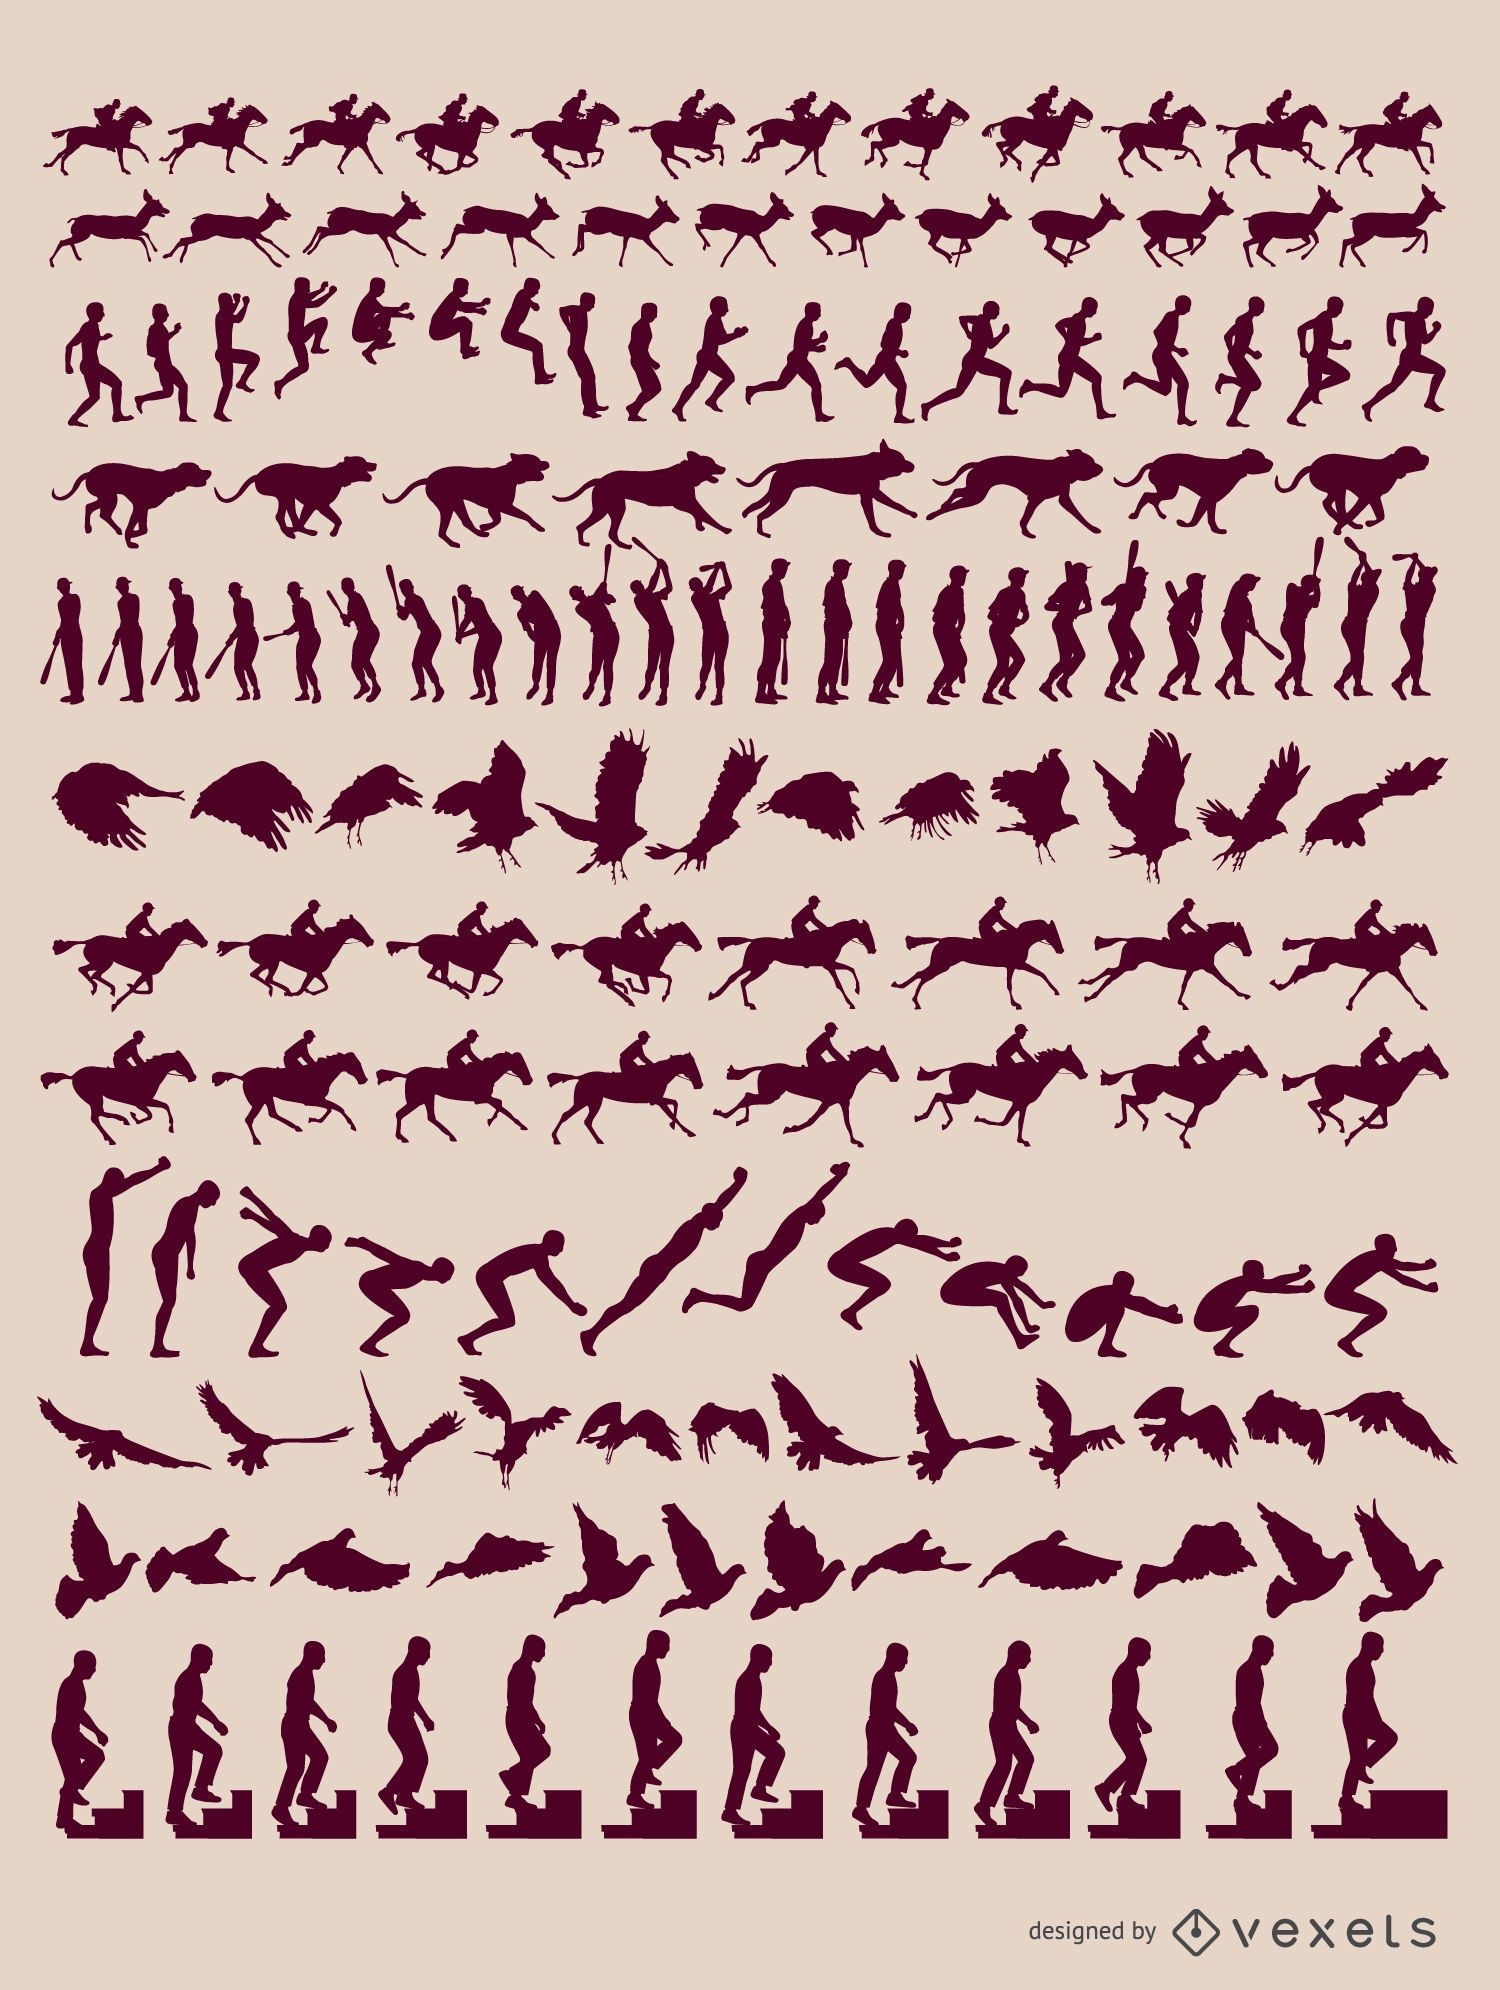 Animals human motion sequences